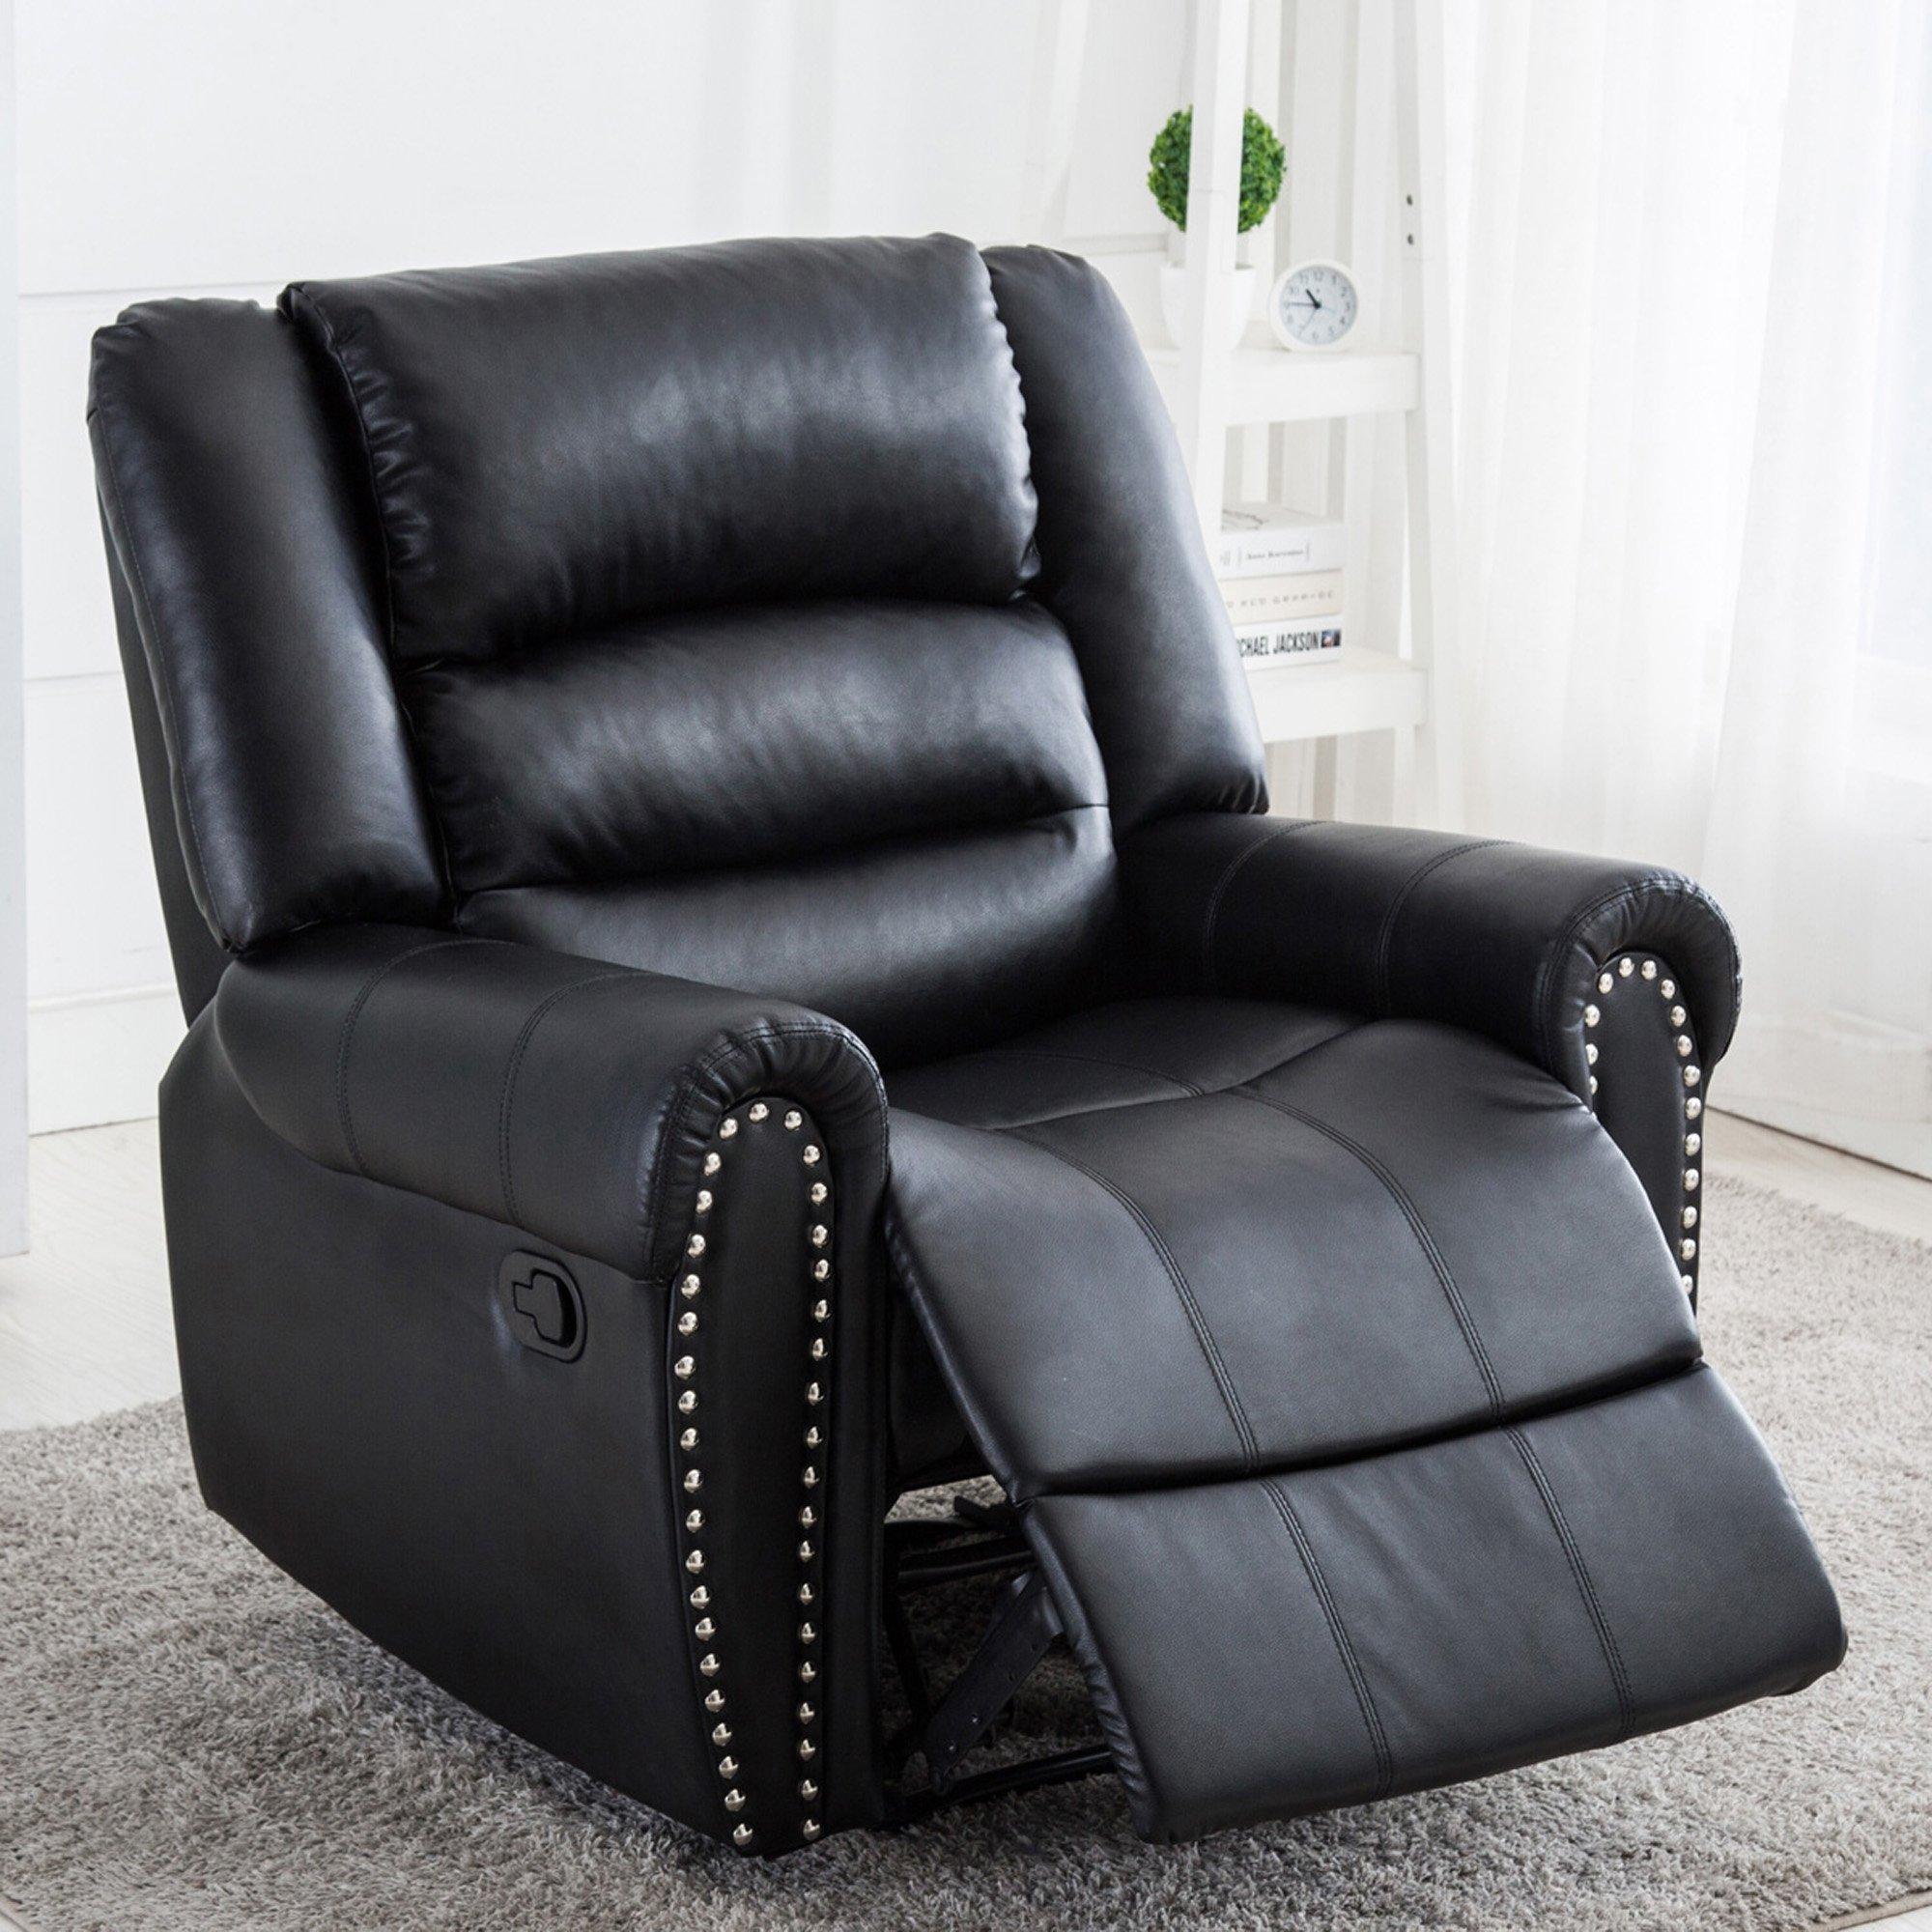 Denver Bonded Leather Manual Recliner Stud Sofa Home Lounge Chair